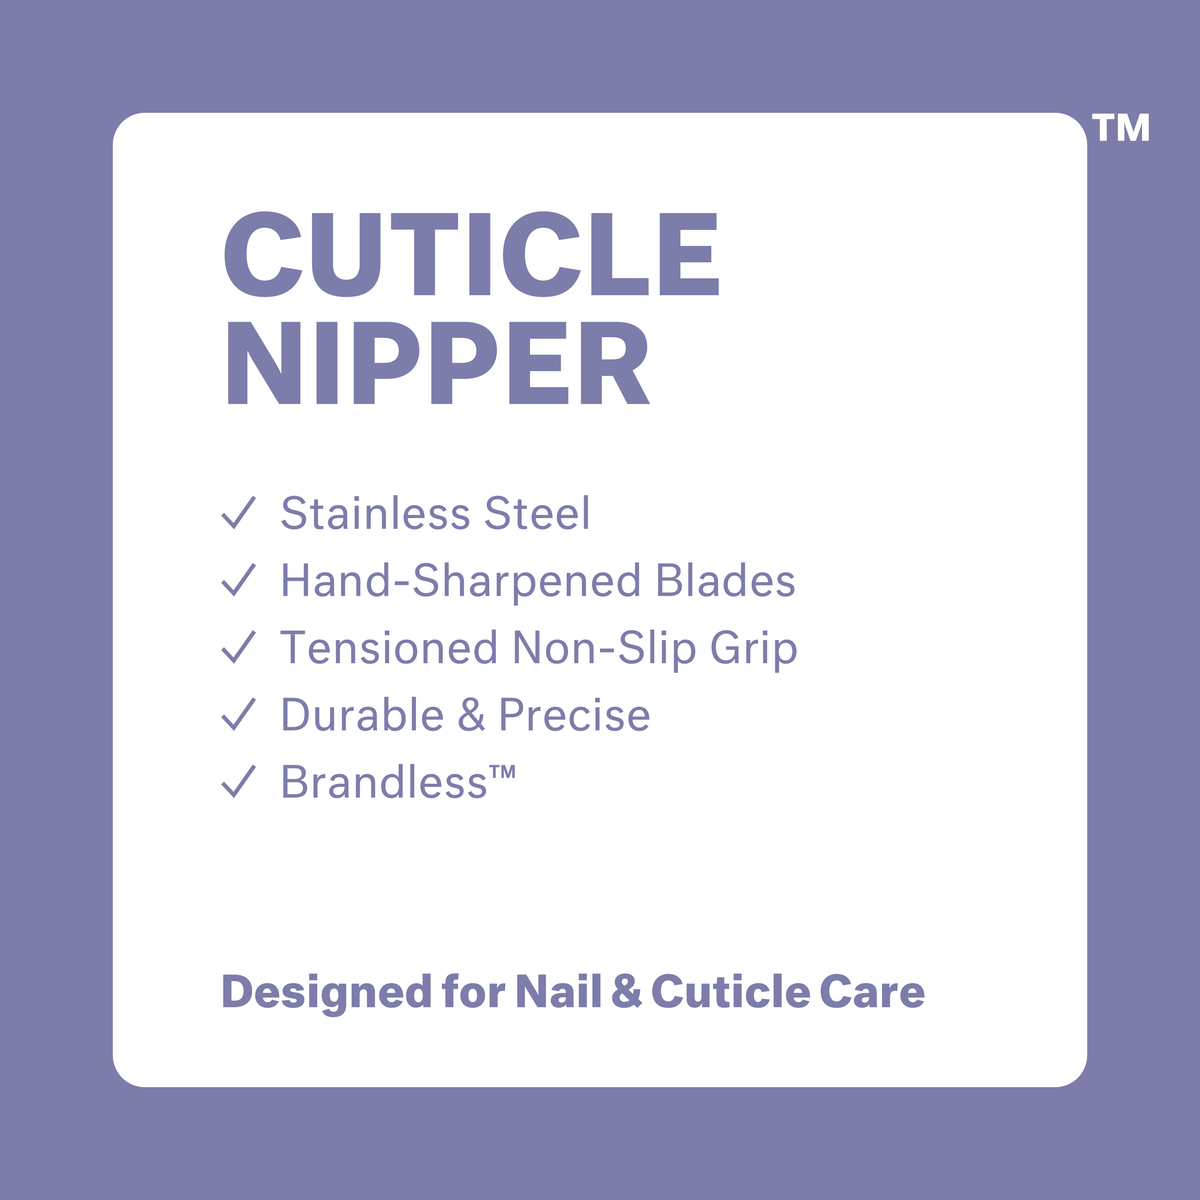 Cuticle Nipper: stainless steel, hand-sharpened blades, tensioned non-slip grip, durable and precise, brandless. Designed for nail and Cuticle care.